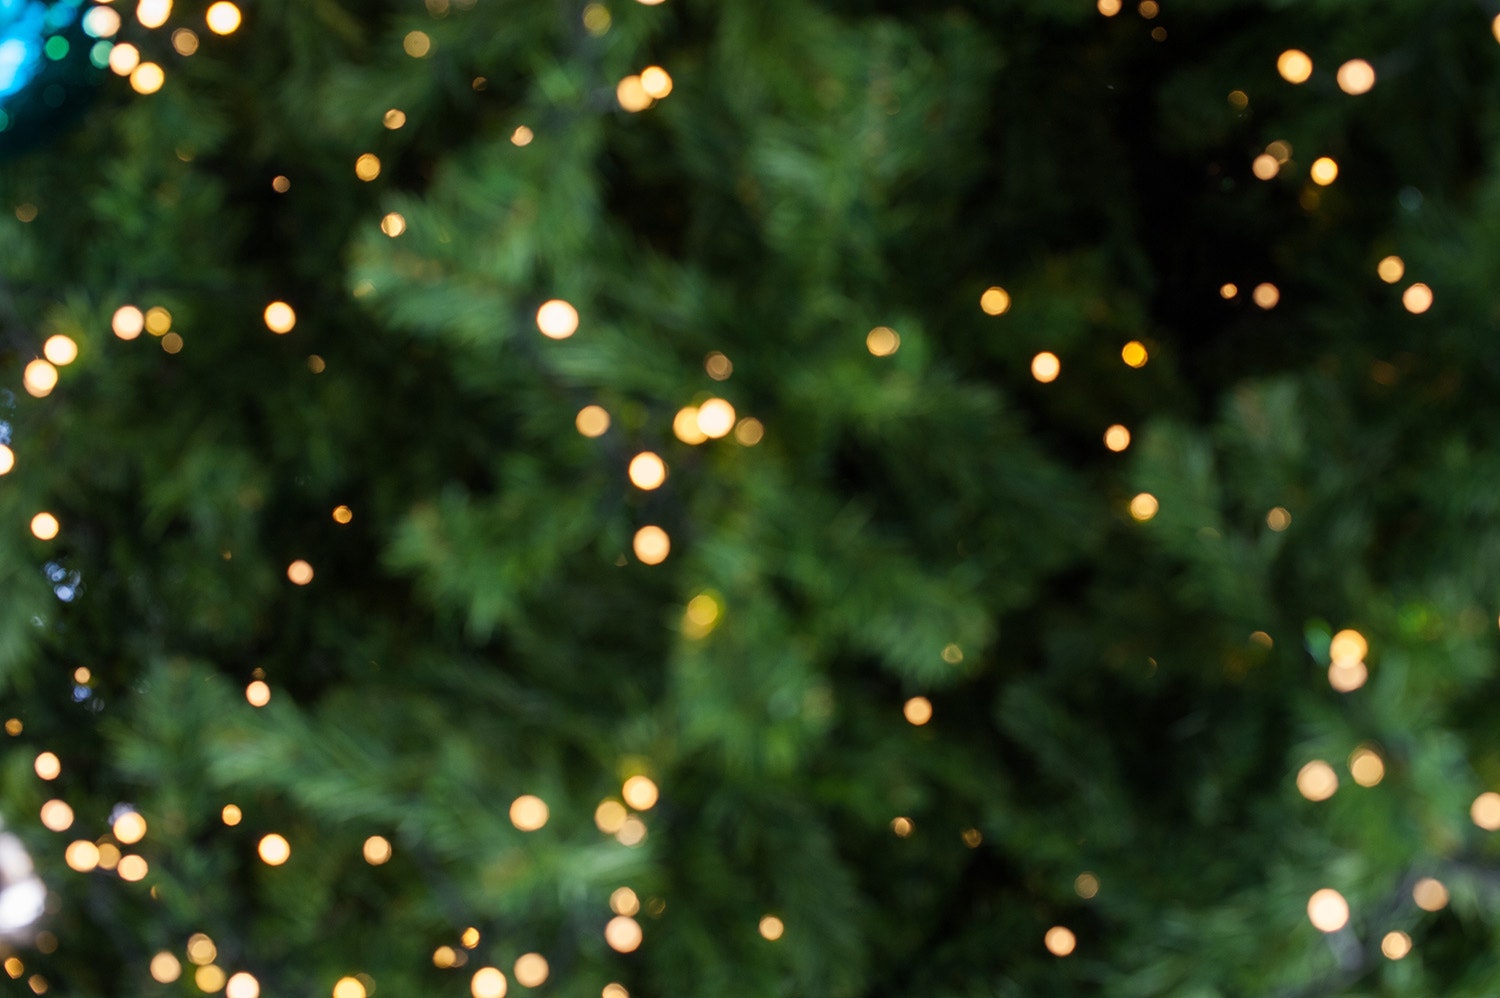 lights on an evergreen tree, slightly out of focus